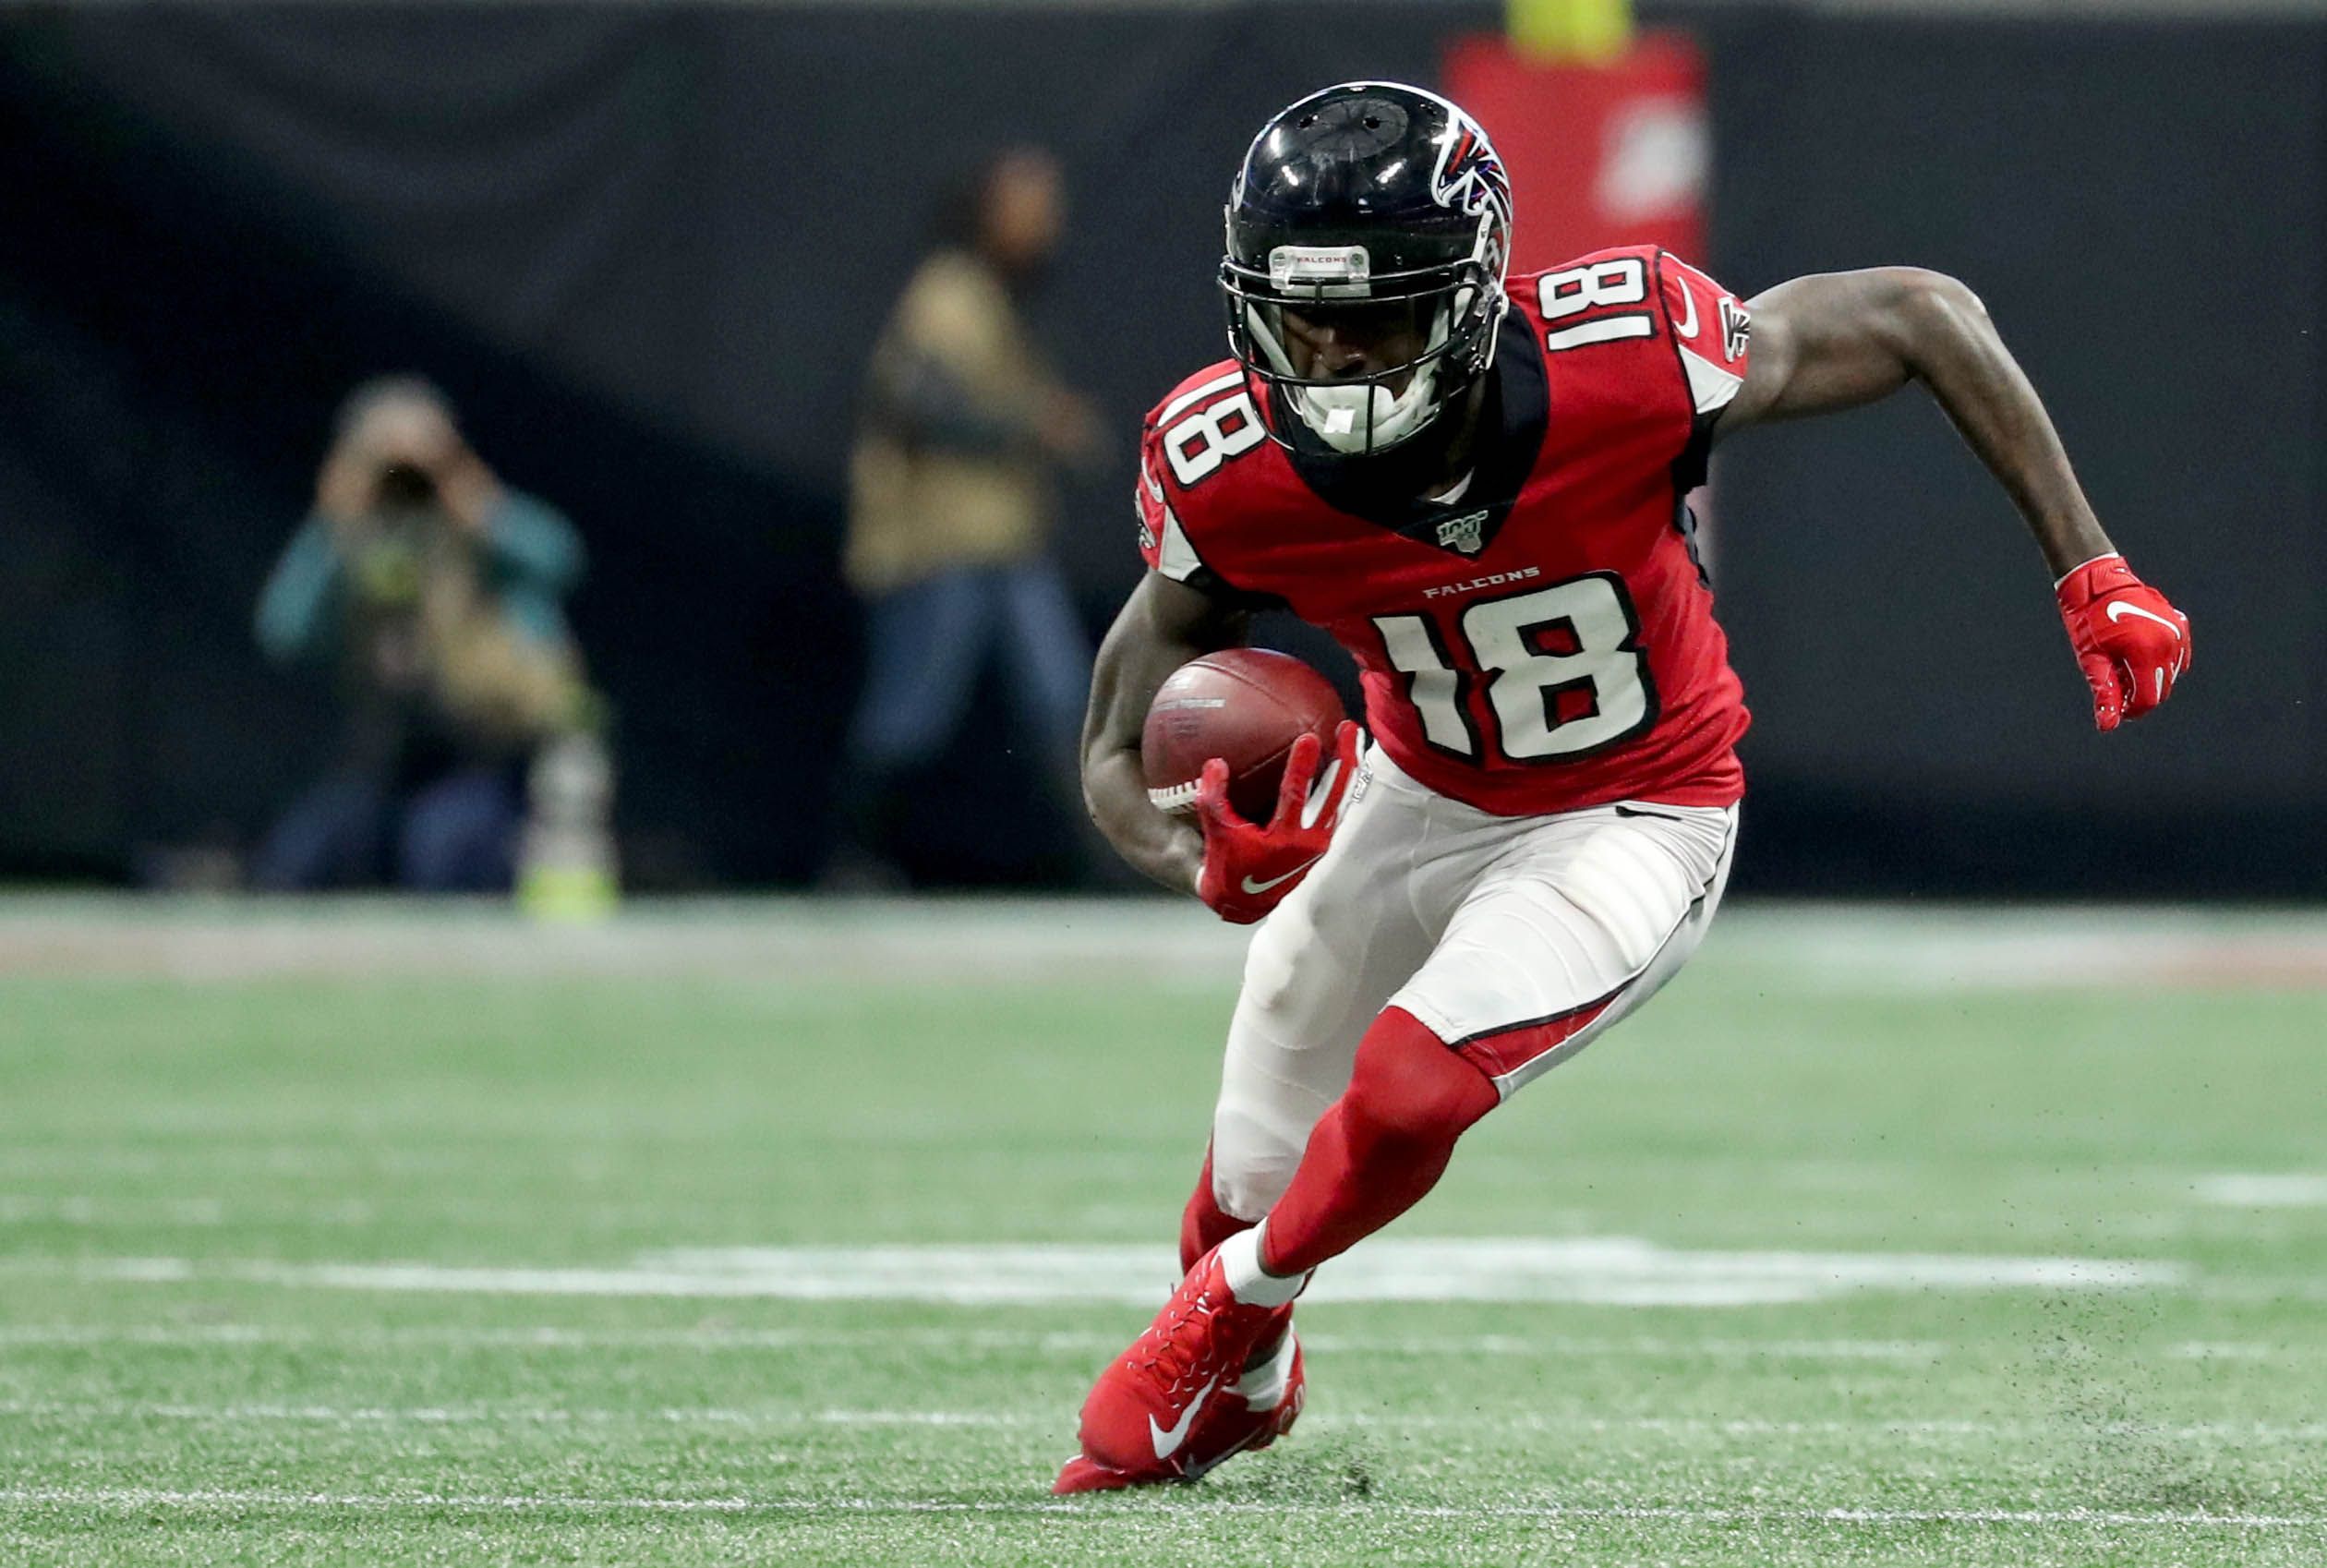 BREAKING: Falcons WR Calvin Ridley to miss the rest of the season with abdominal injury